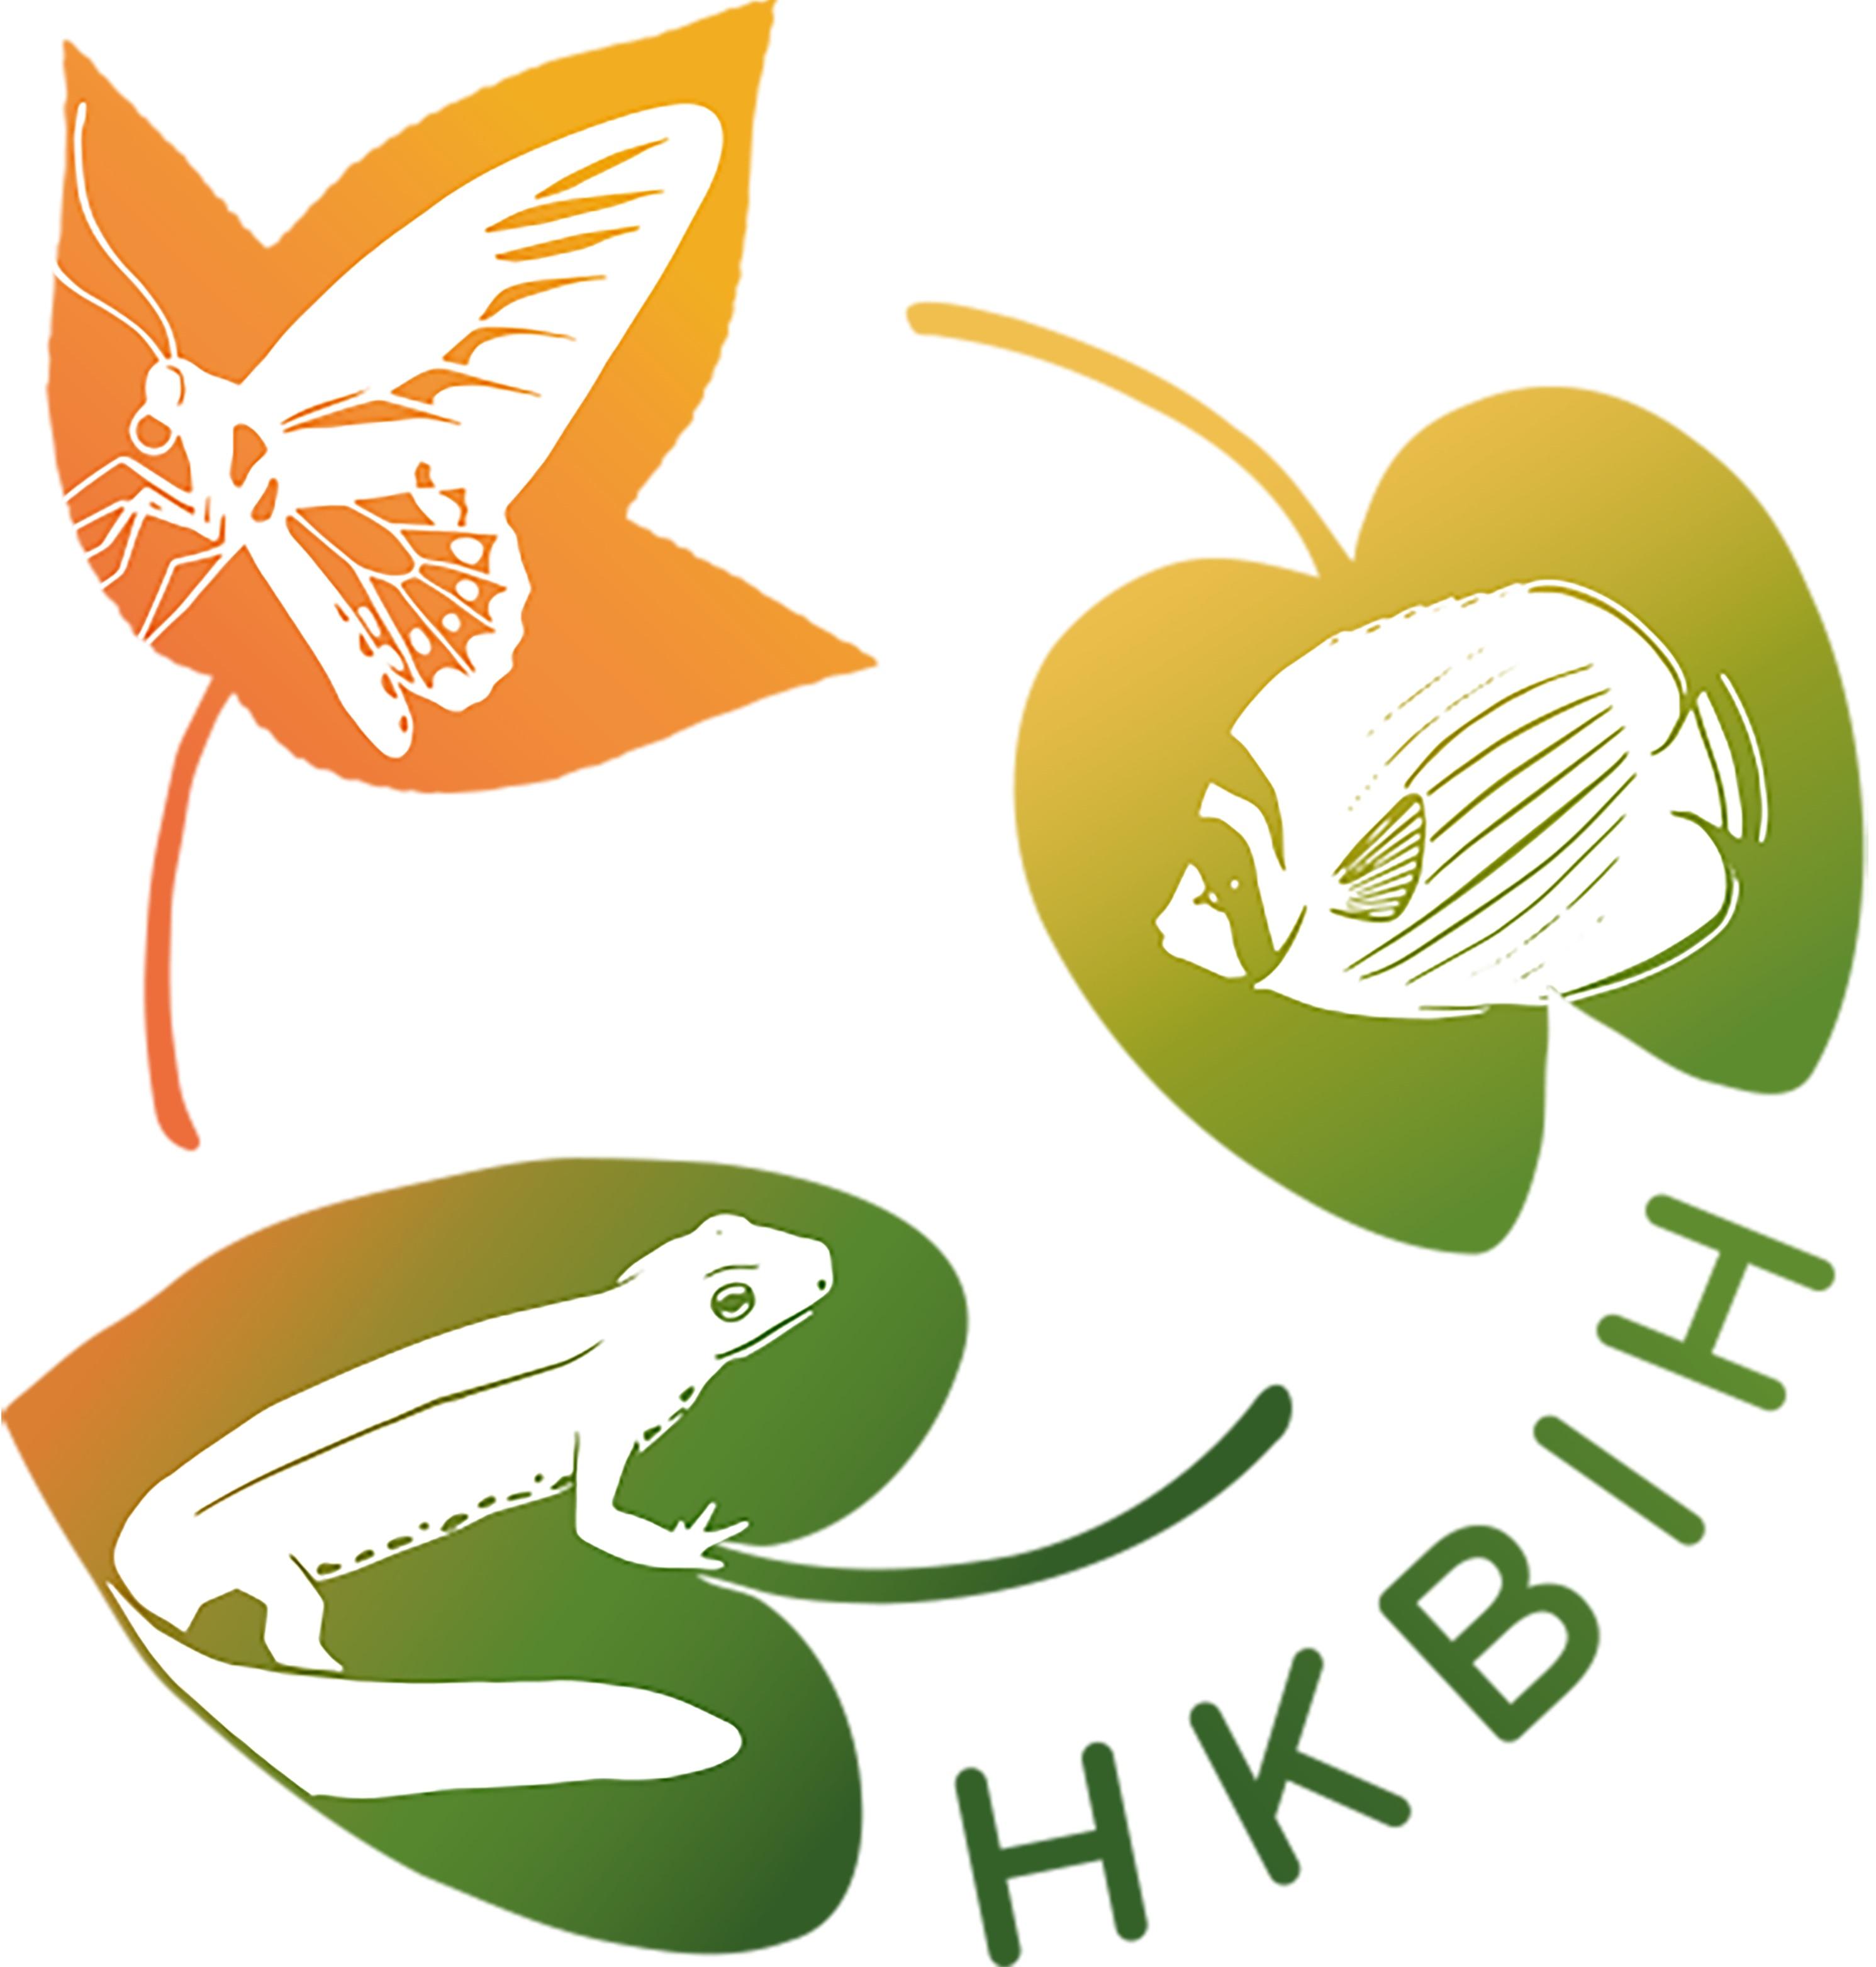 The Agriculture, Fisheries and Conservation Department launched the Hong Kong Biodiversity Information Hub (HKBIH) today (March 1) aiming to foster a better understanding of local biodiversity by members of the public. The design concept of the HKBIH logo originated from the seasonality, connectivity and diversity of the local ecosystems.